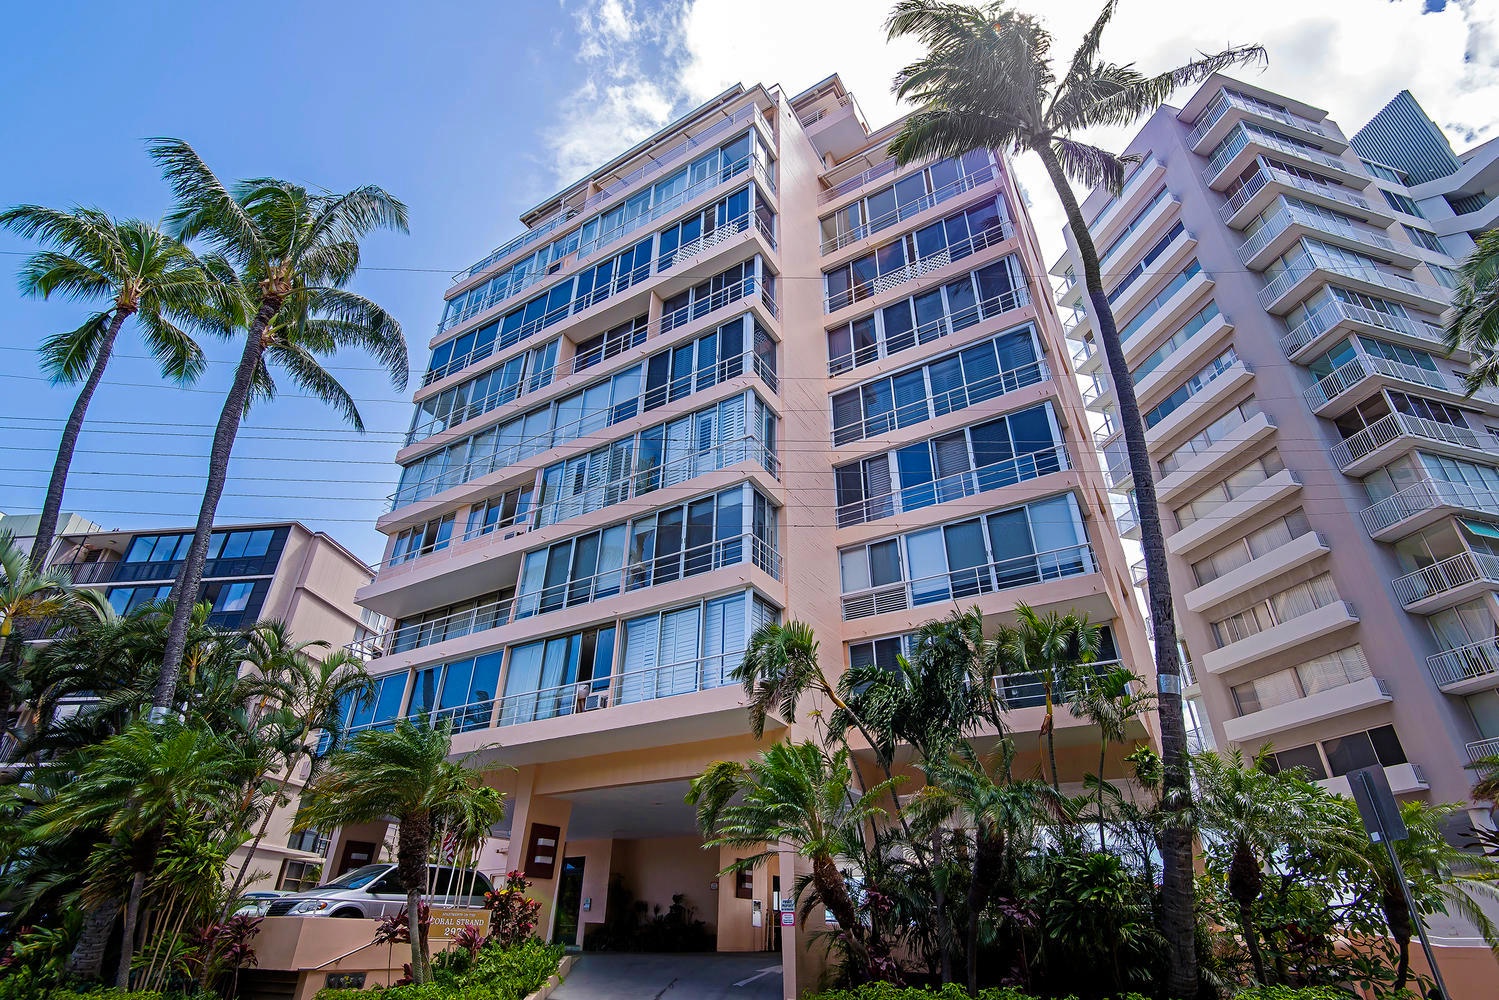 Honolulu Vacation Rentals, Executive Gold Coast Oceanfront Suite - The Coral Strand, located off Kalakaua on the Gold Coast.